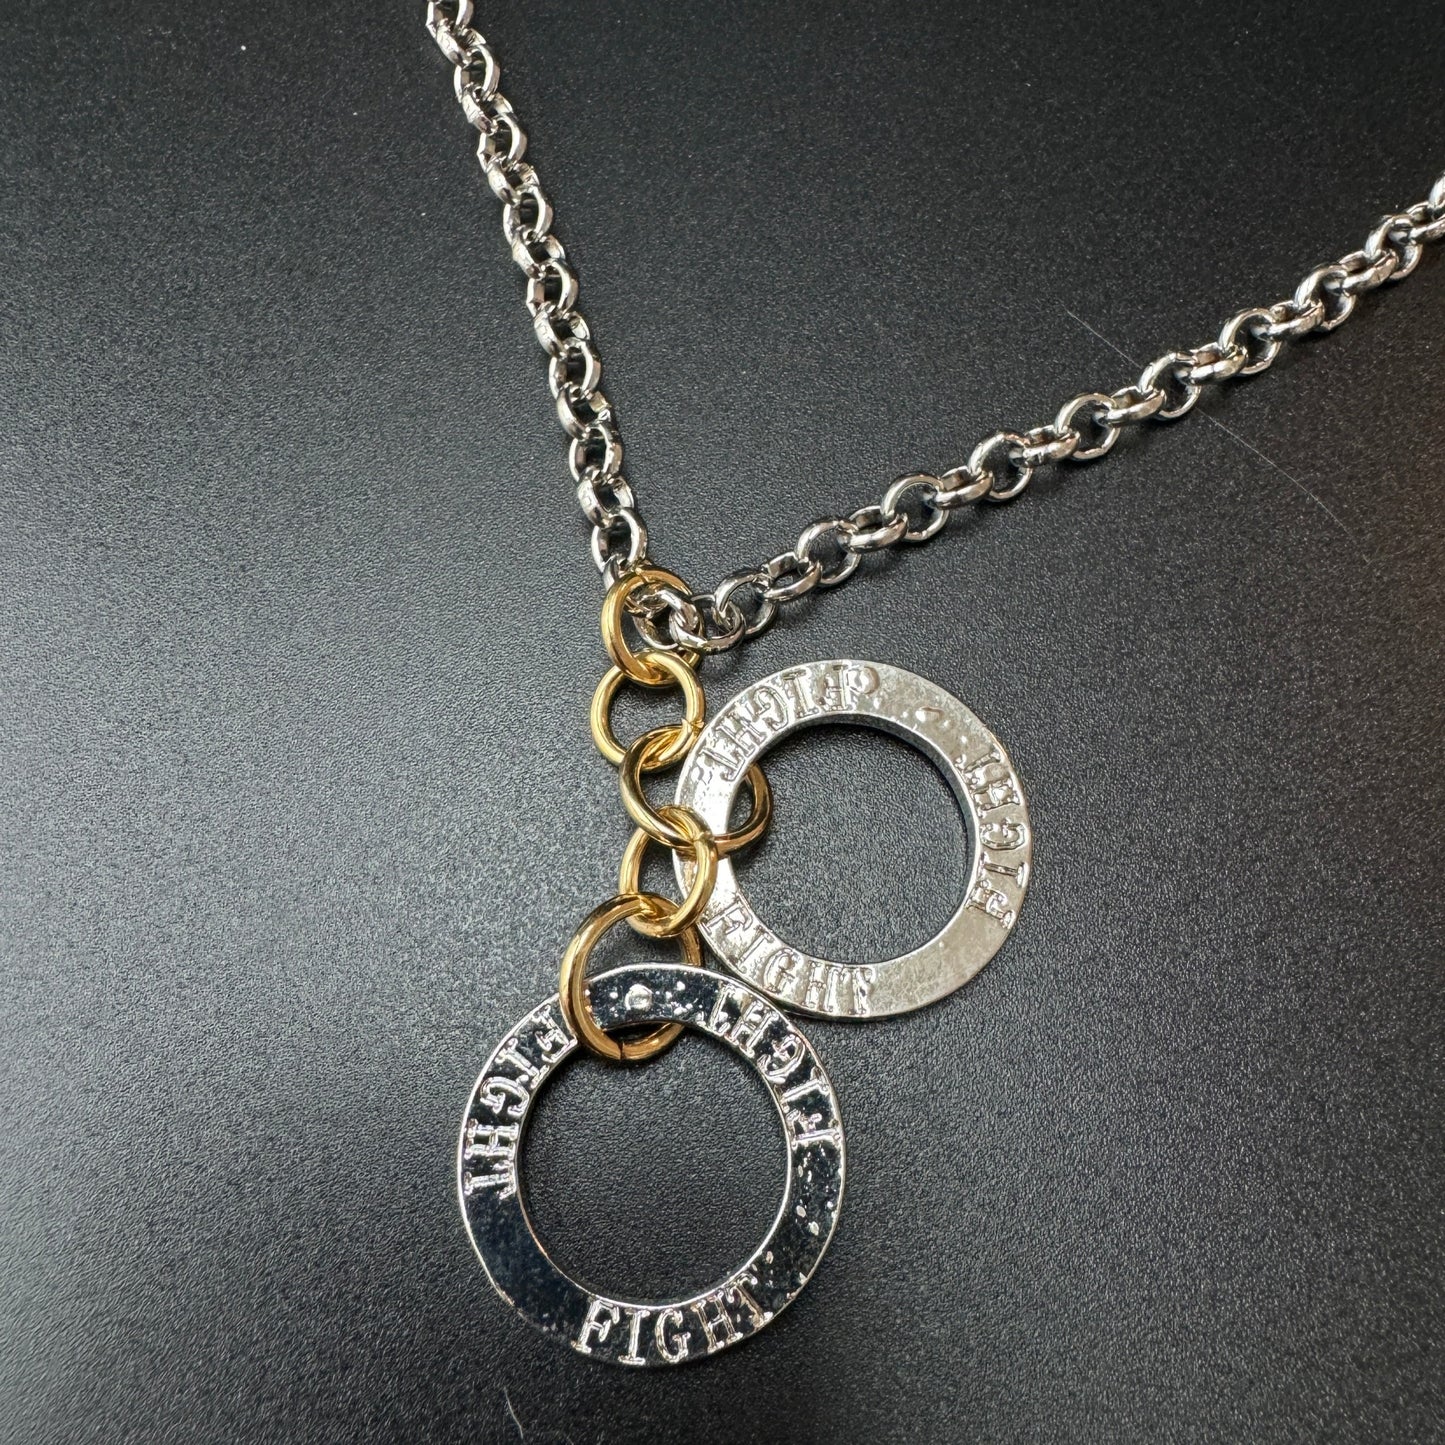 Necklace "Fight for me" short model